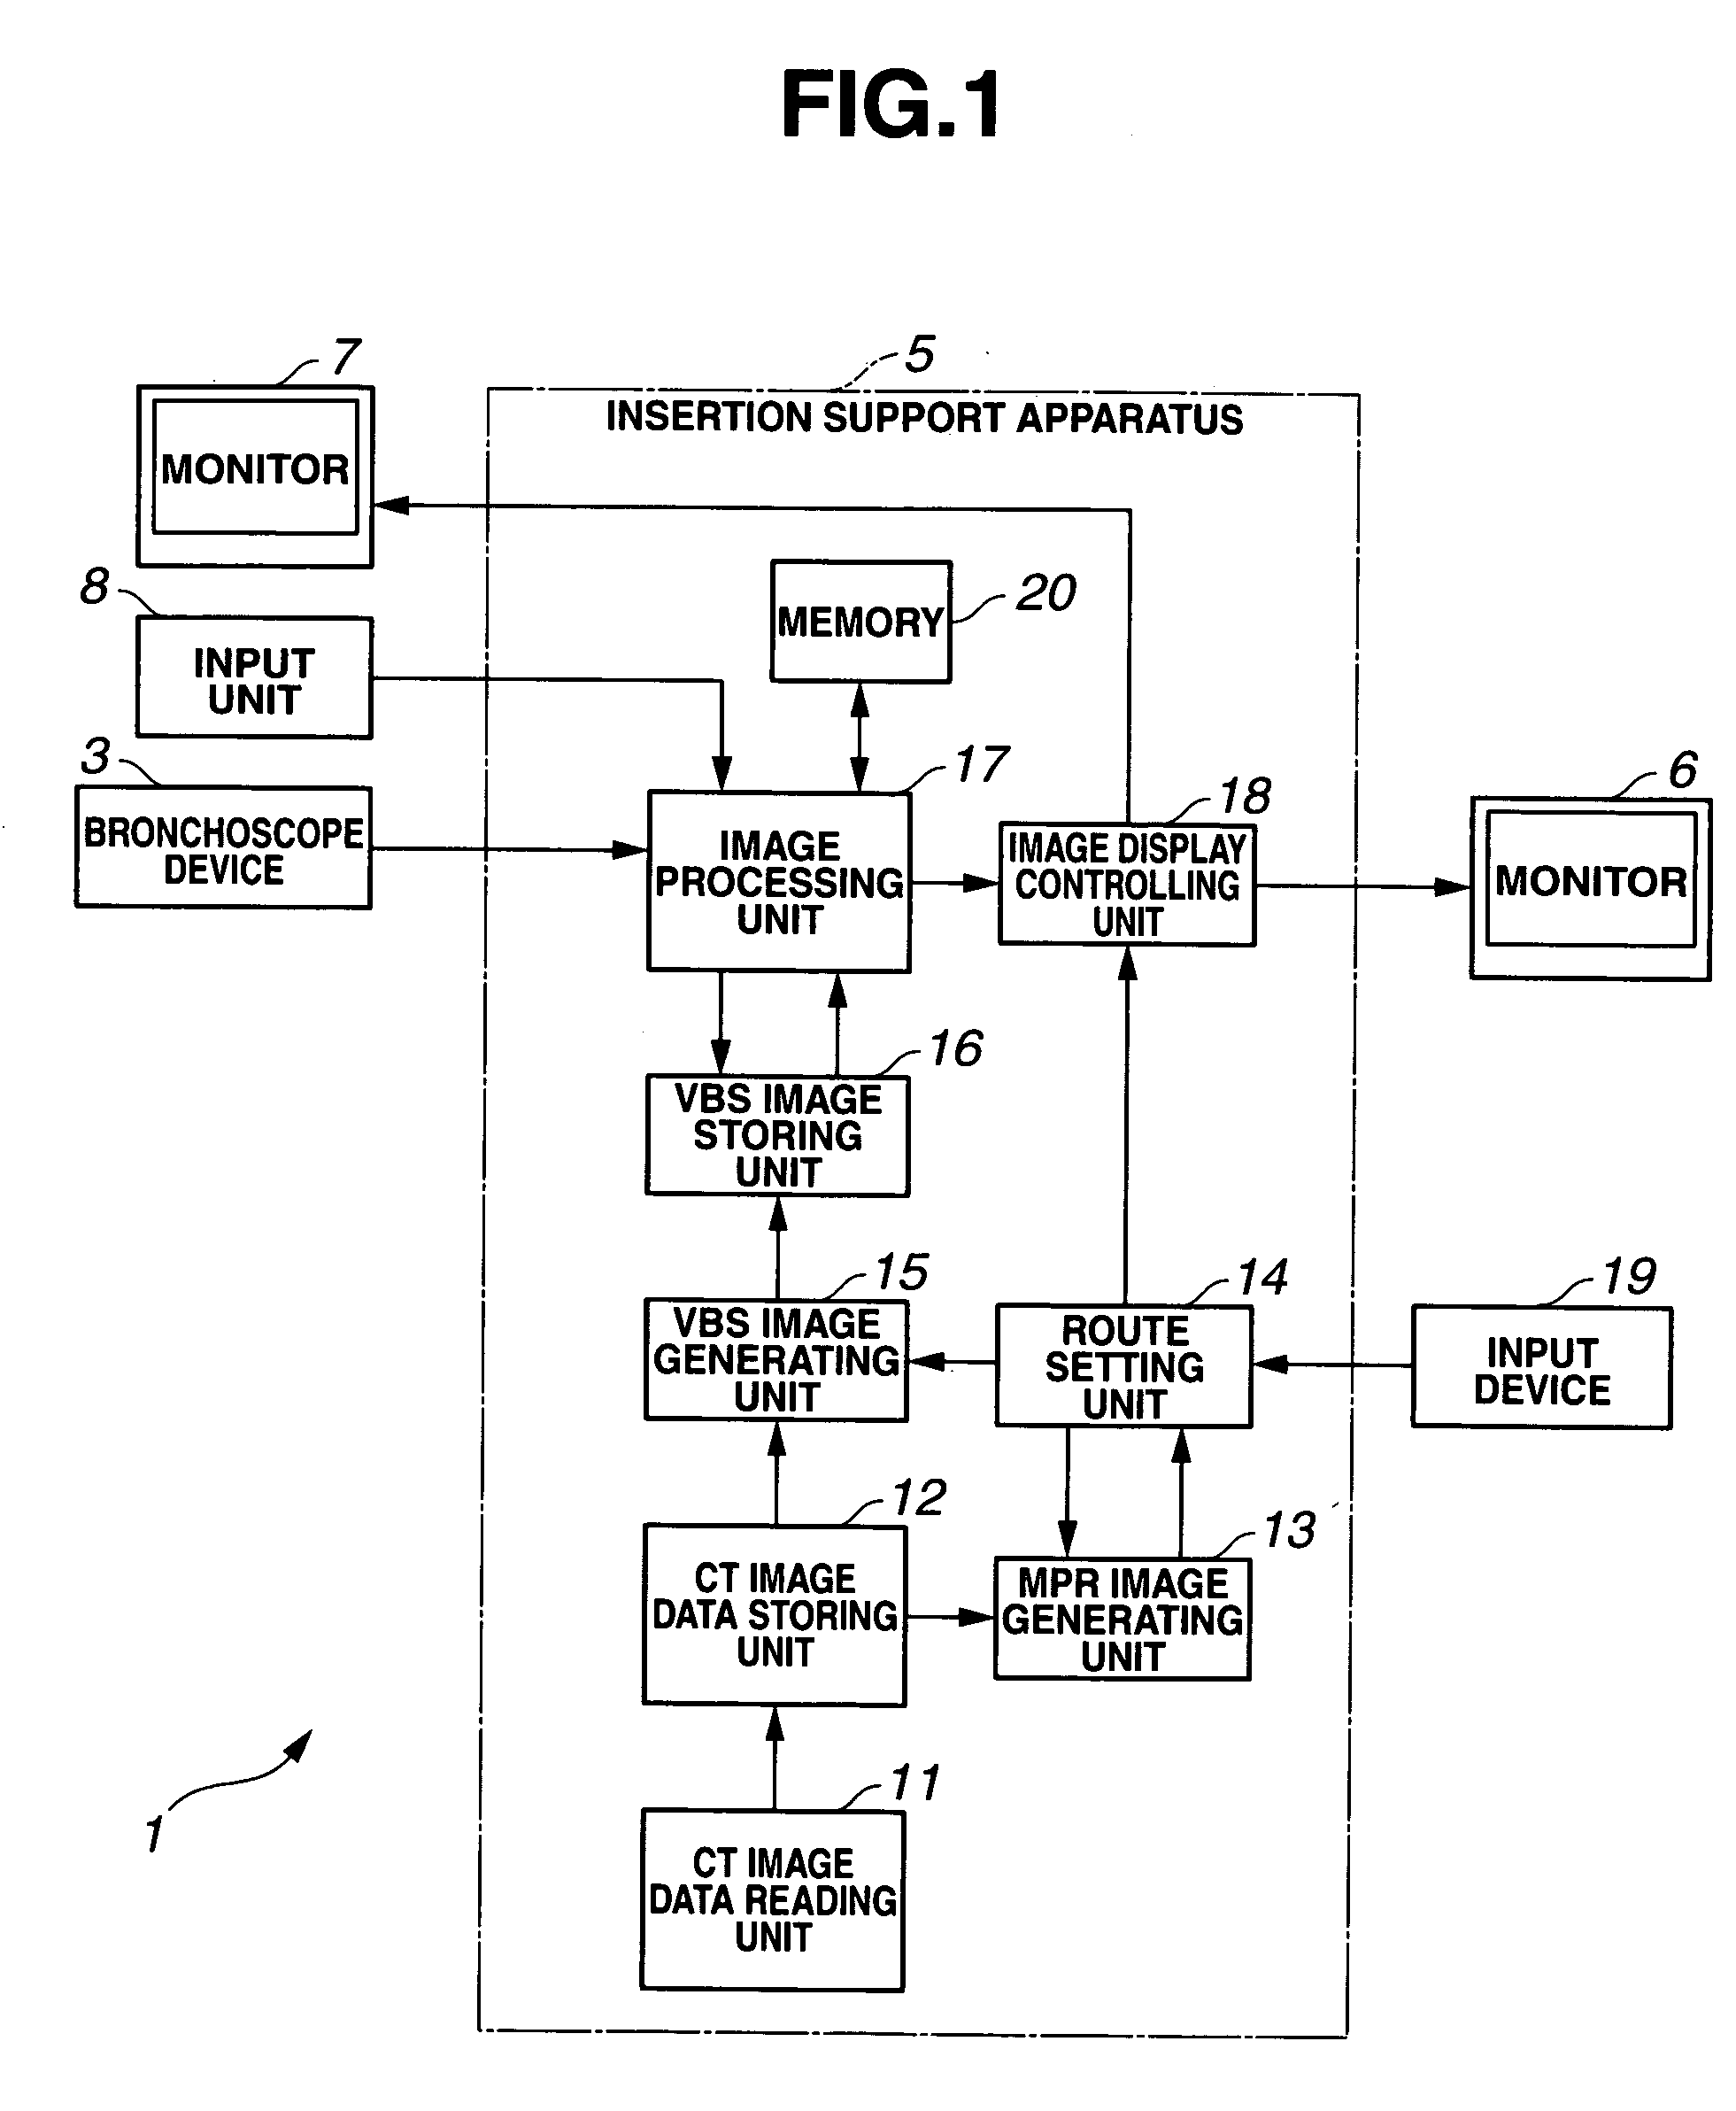 Insertion support system for specifying a location of interest as an arbitrary region and also appropriately setting a navigation leading to the specified region